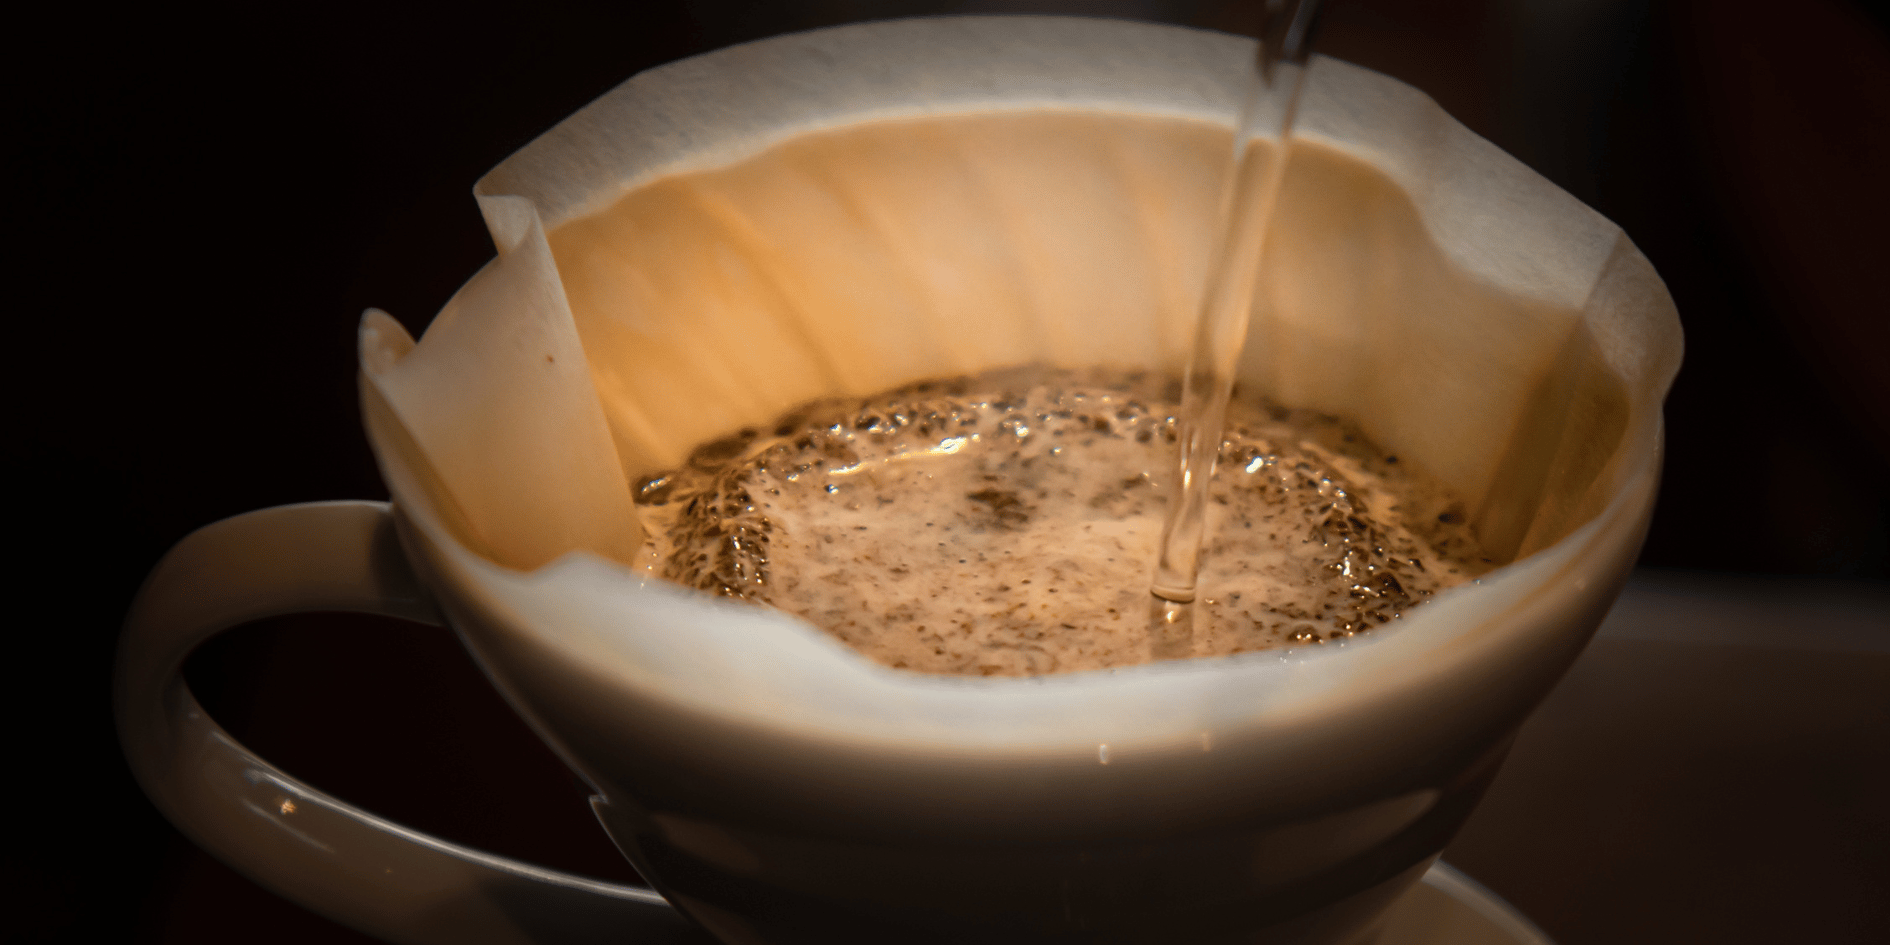 Peak Flavor delivers best fresh roasted pour over coffee